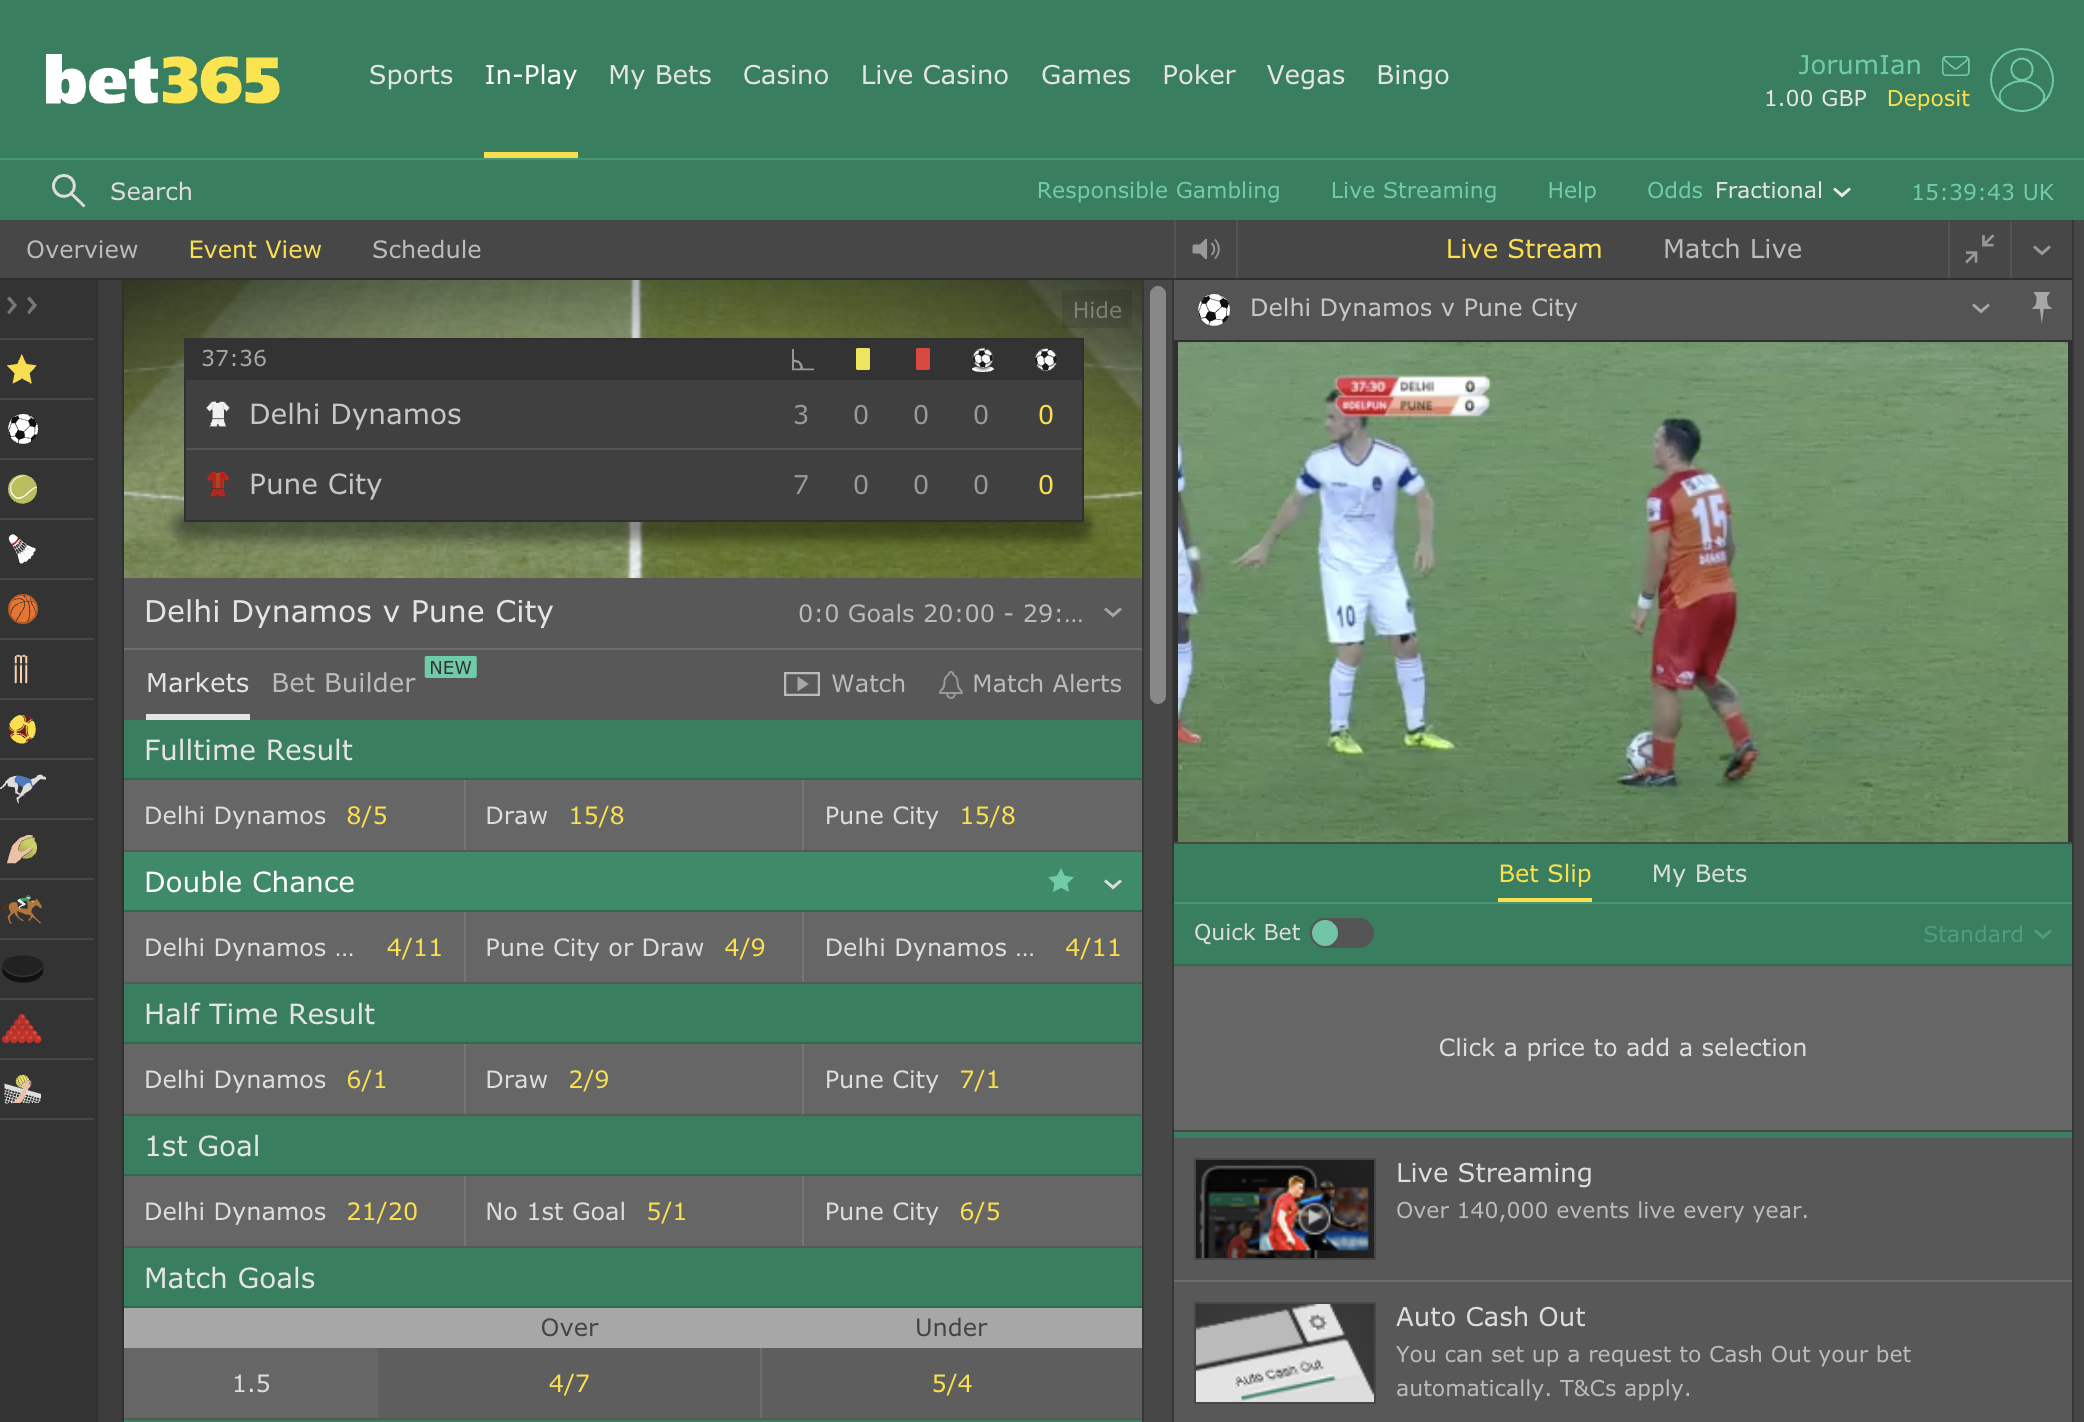 Get More from Your bet365 Sport Account with Live Streaming